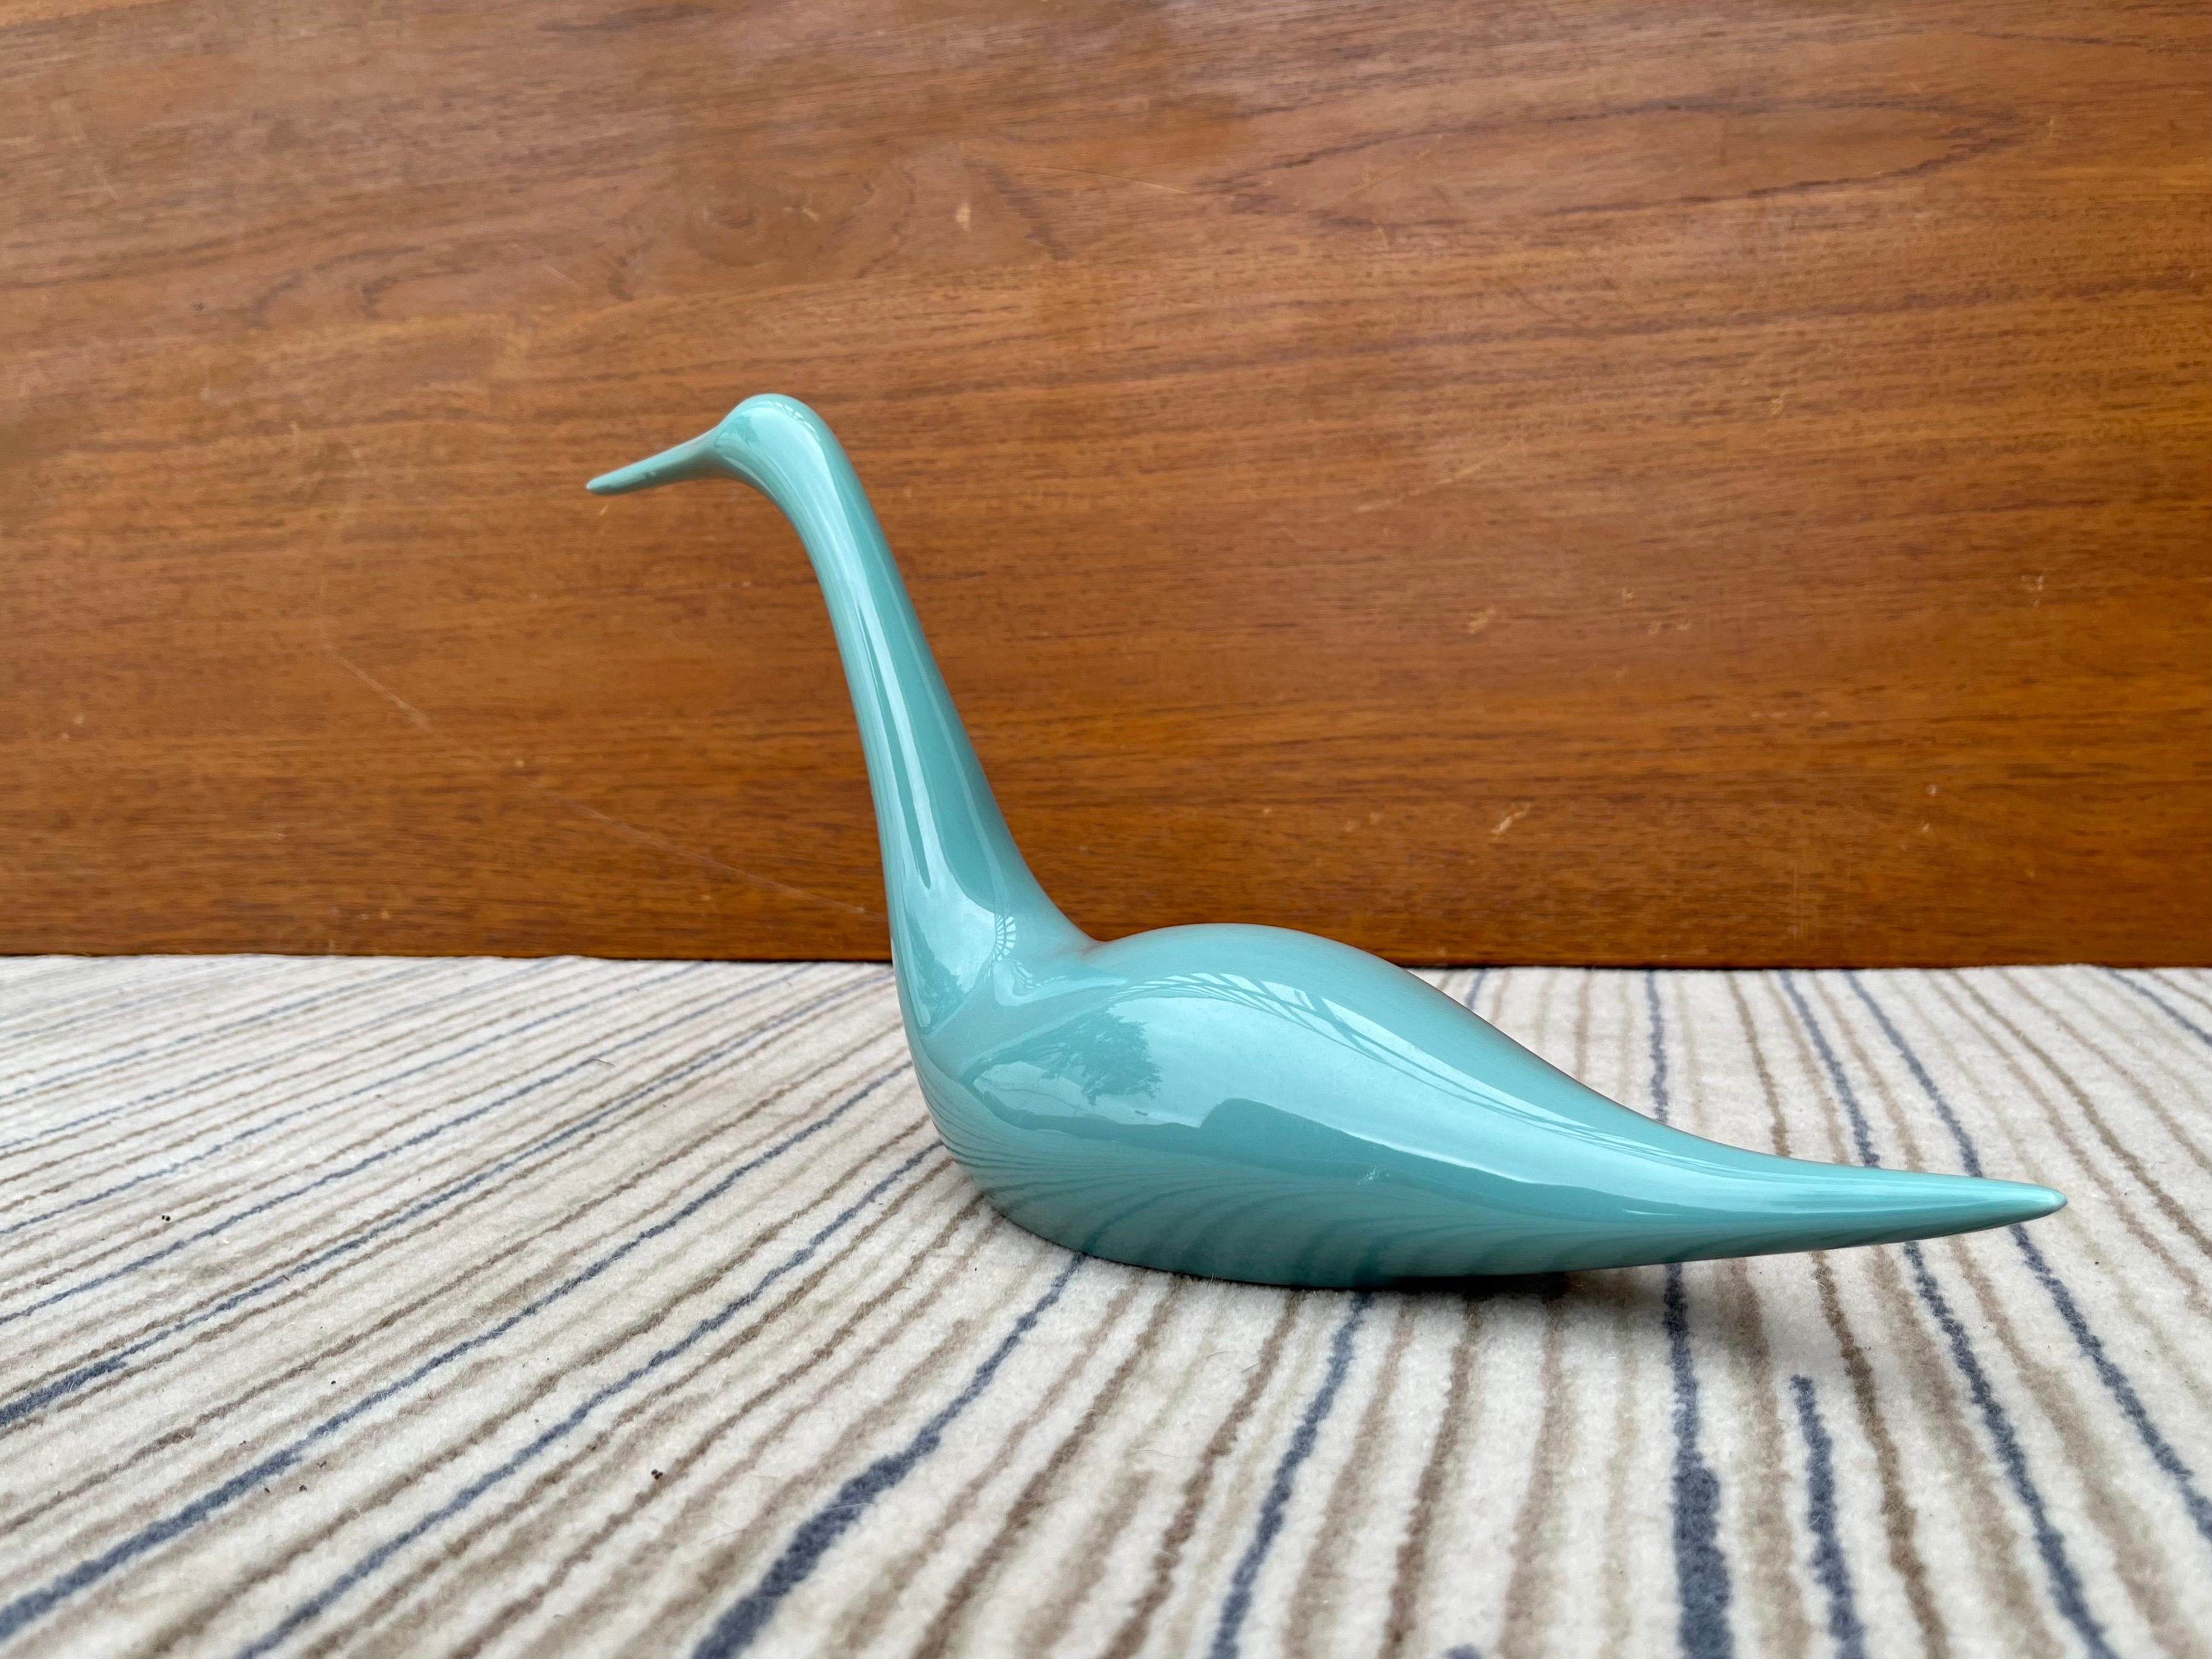 Large Scale Postmodern Ceramic Birds Figurines Jaru Art Pottery of California In Good Condition For Sale In Miami, FL